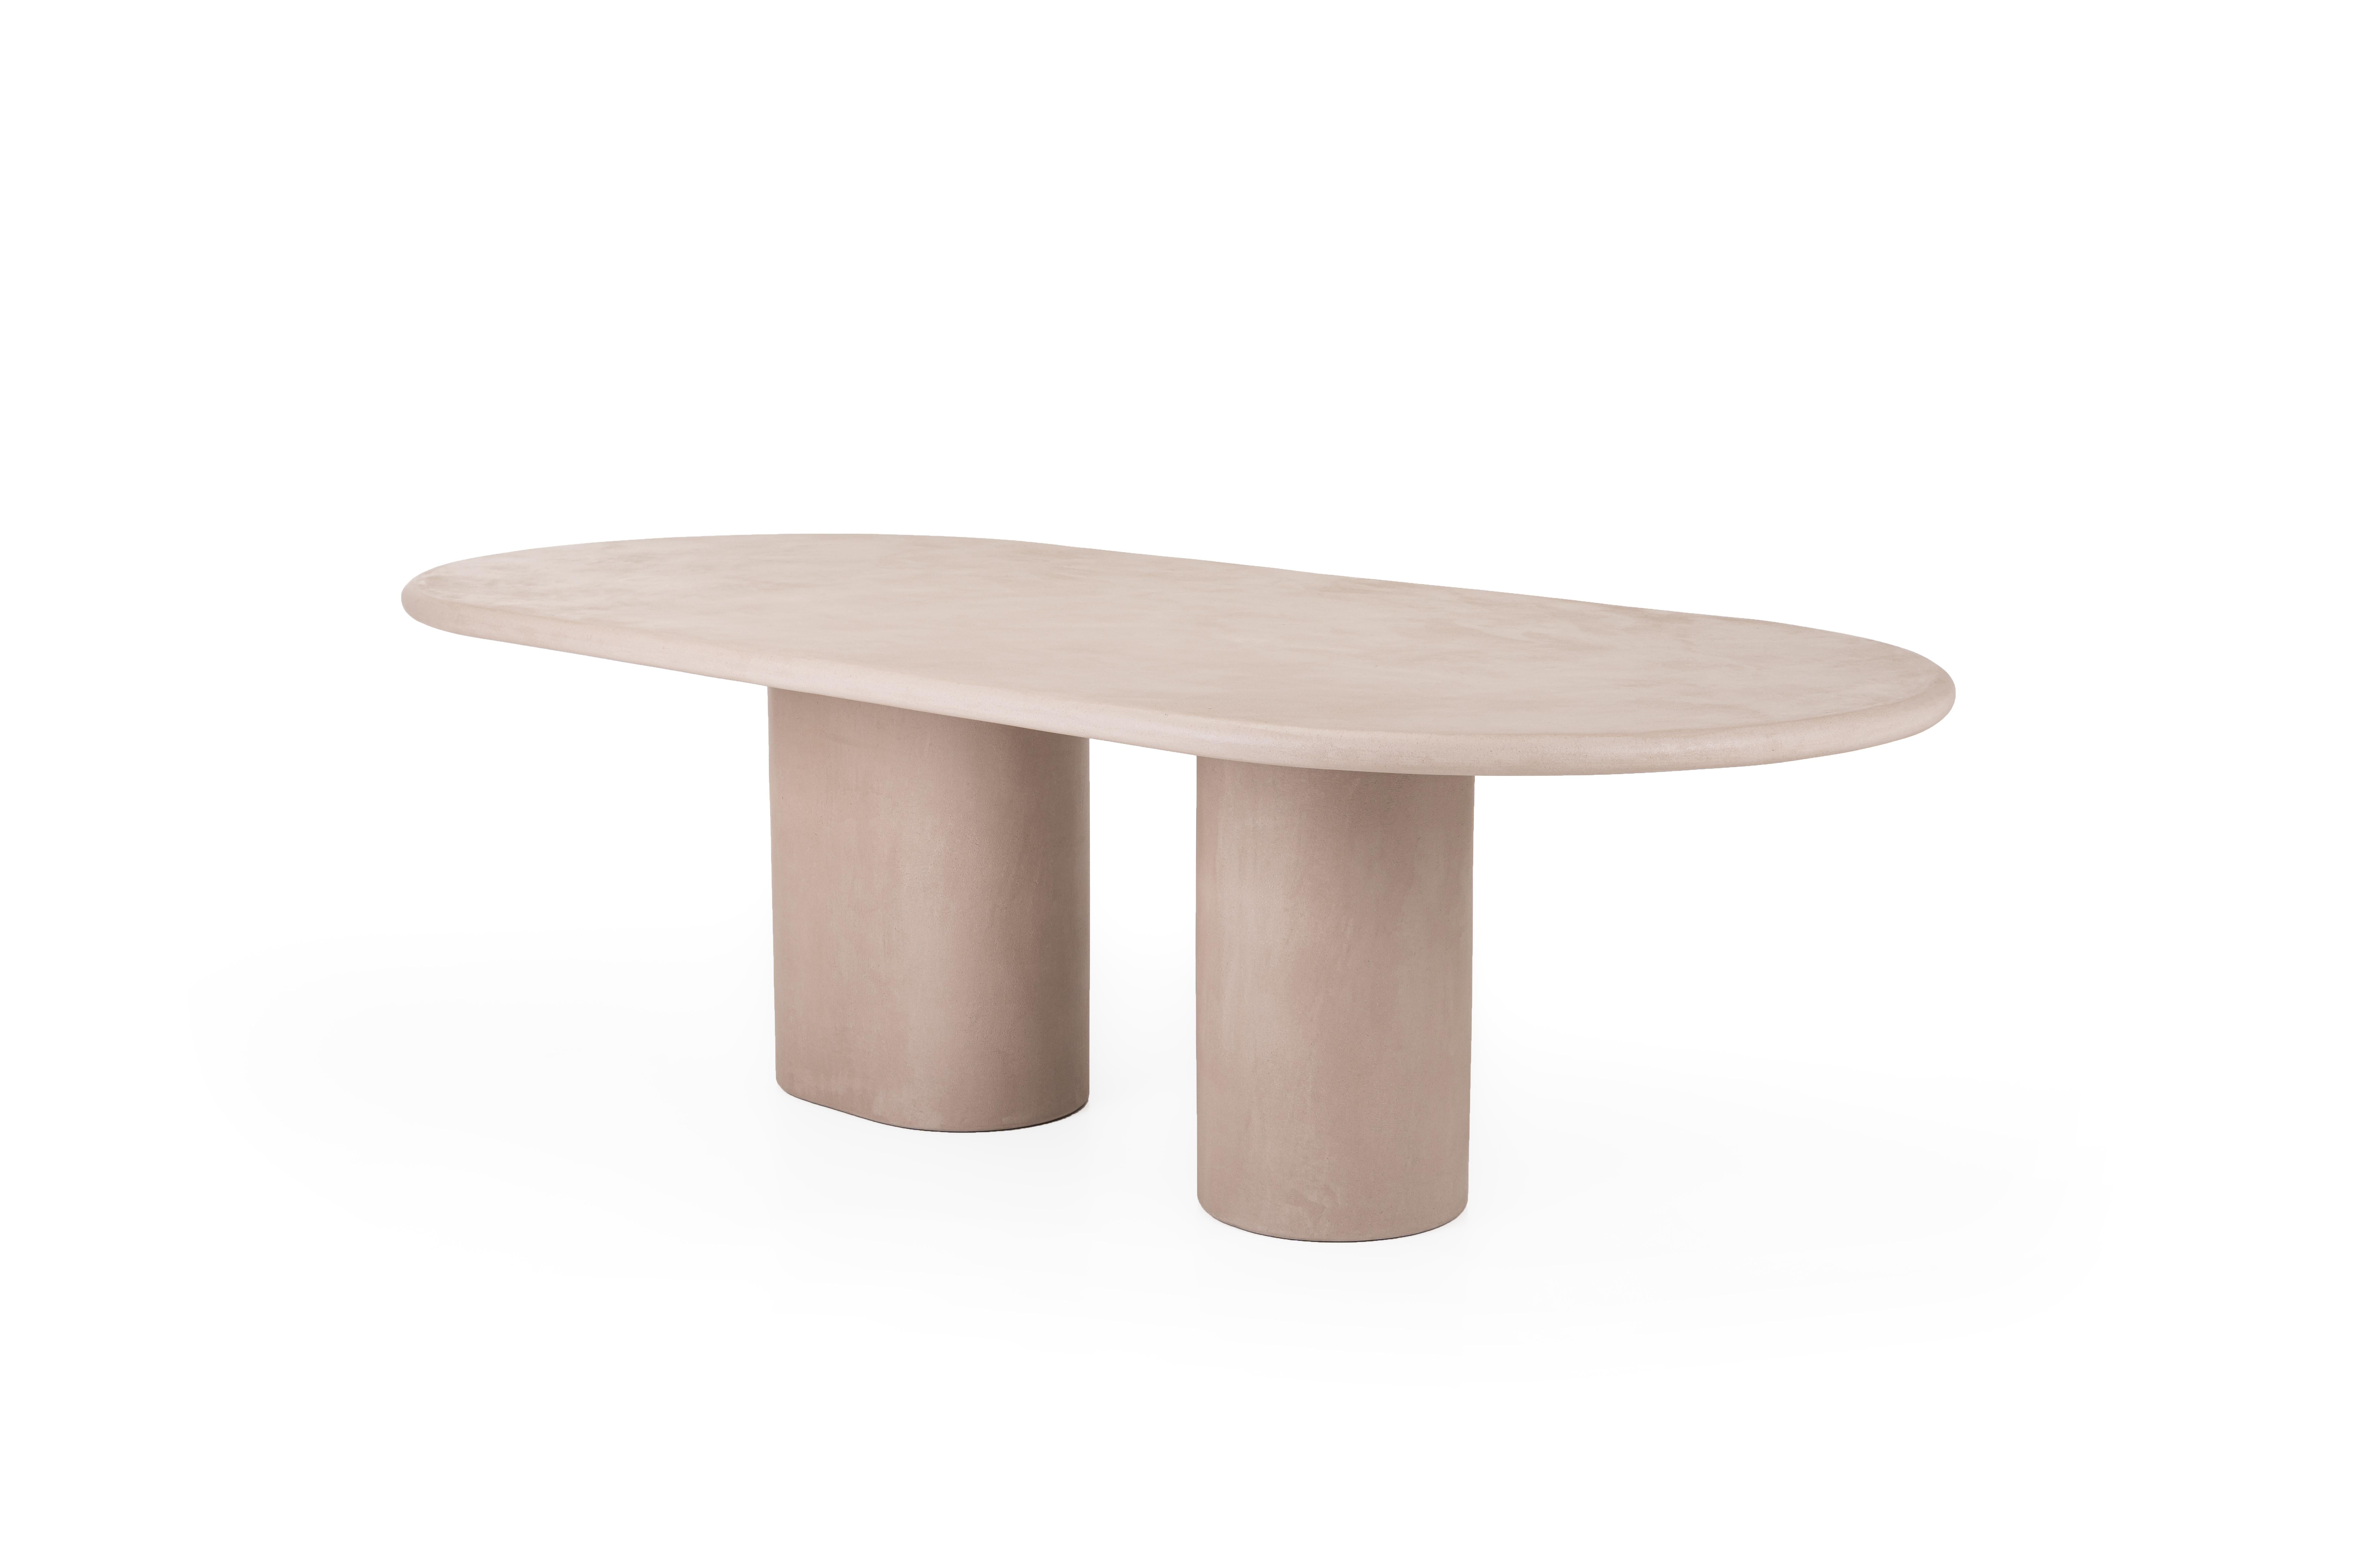 Natural Plaster Dining Table "Column" 320 by Isabelle Beaumont For Sale